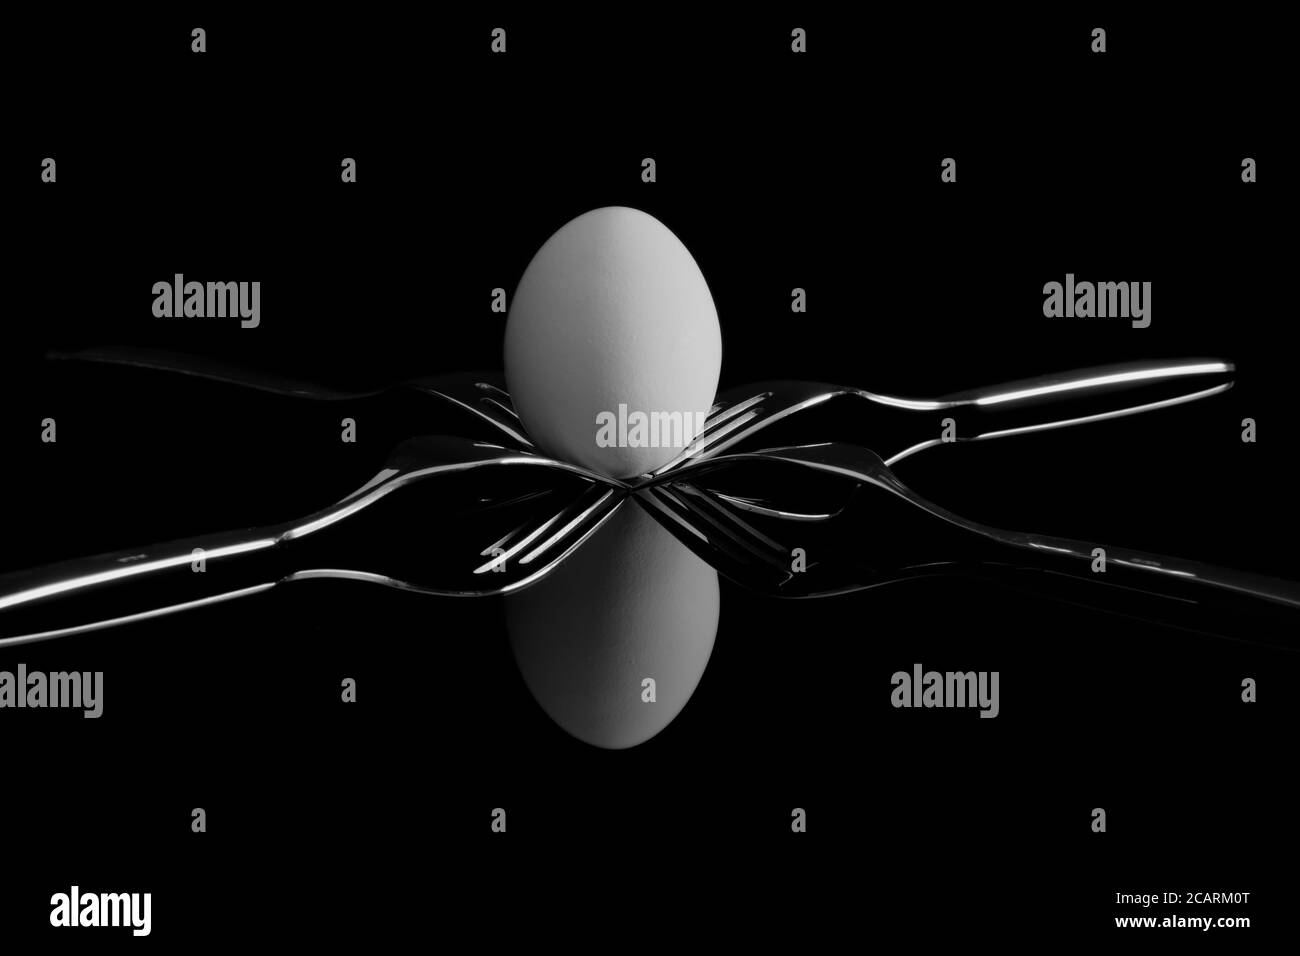 An egg balancing between four forks. Reflection on a black background. Stock Photo